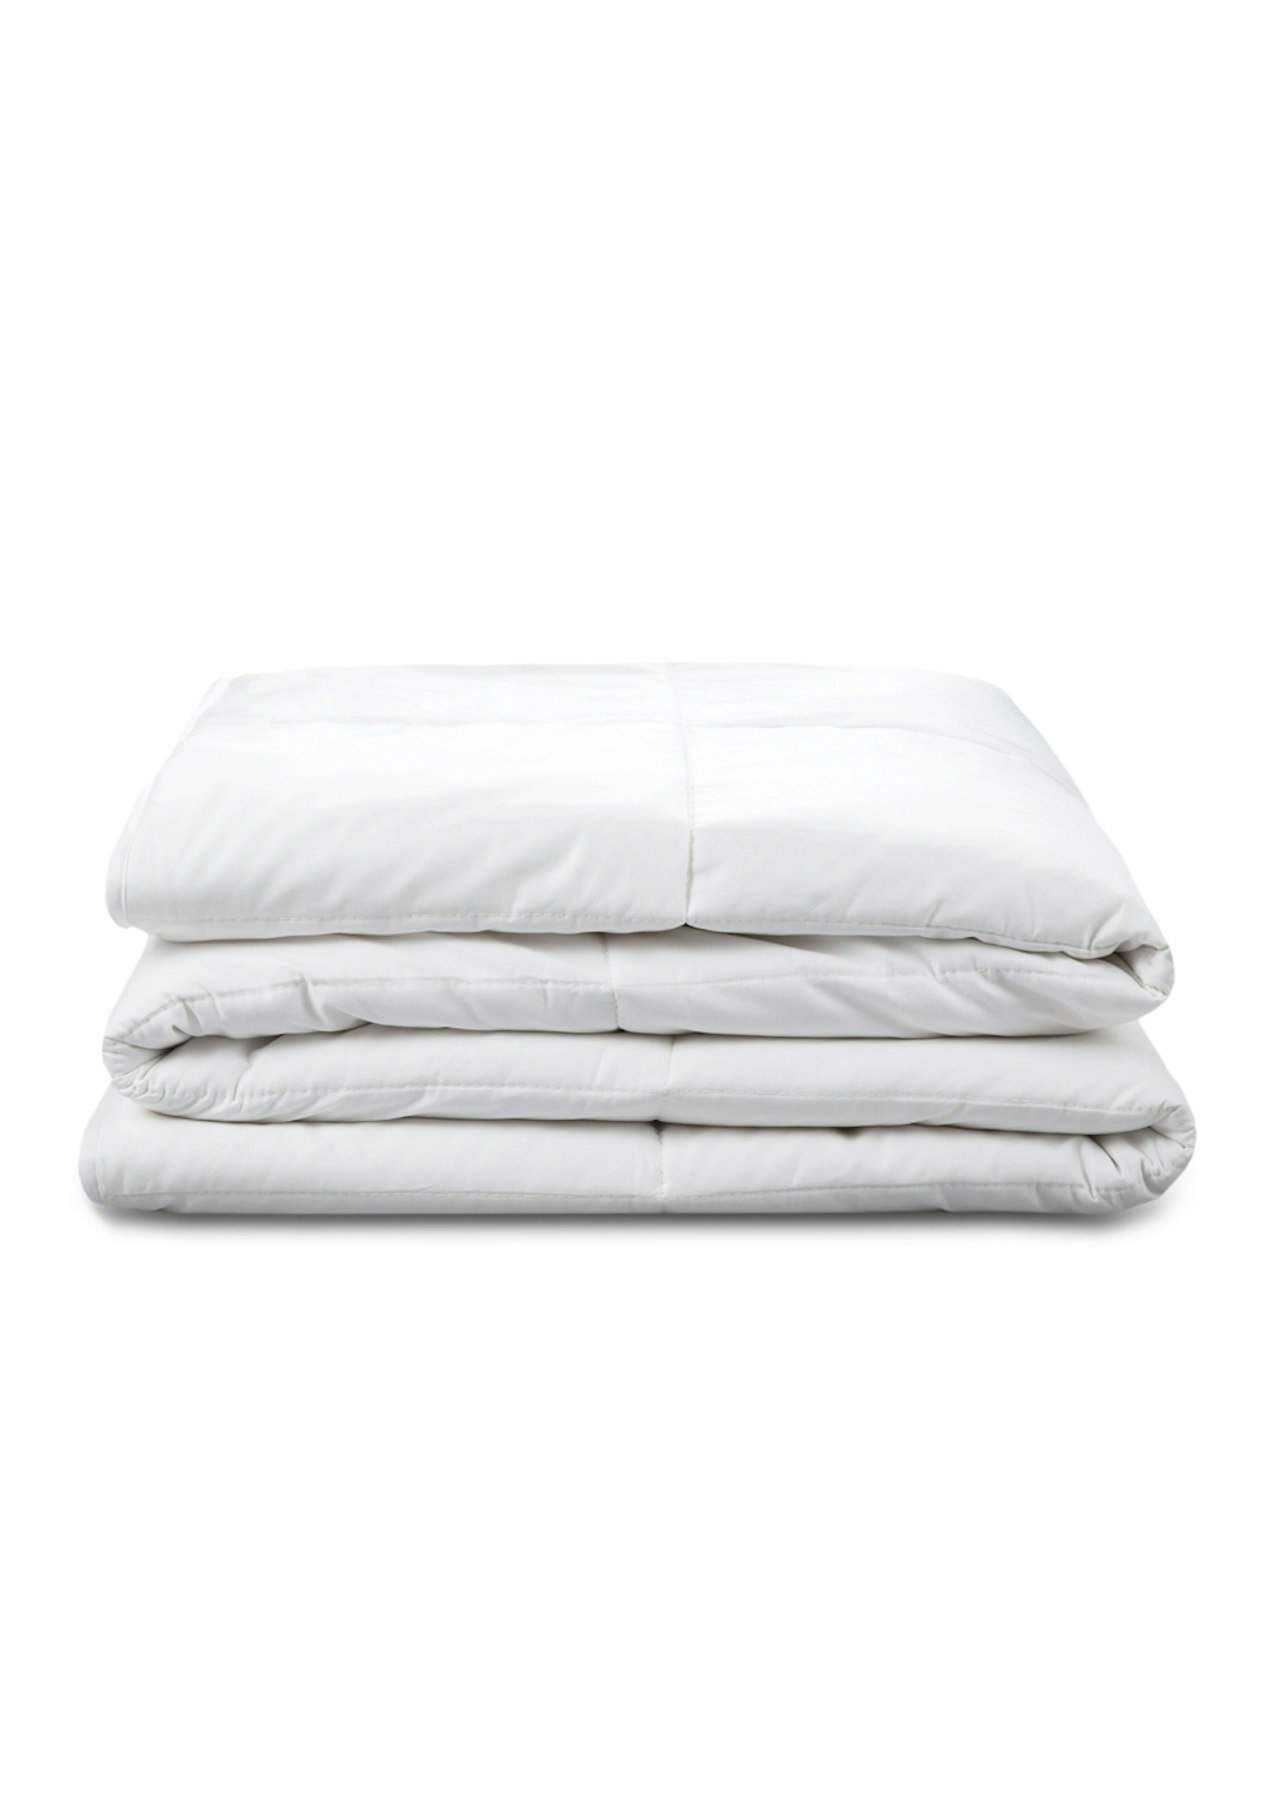 Natural Home Summer Wool Quilt 300gsm Qb White Natural Home